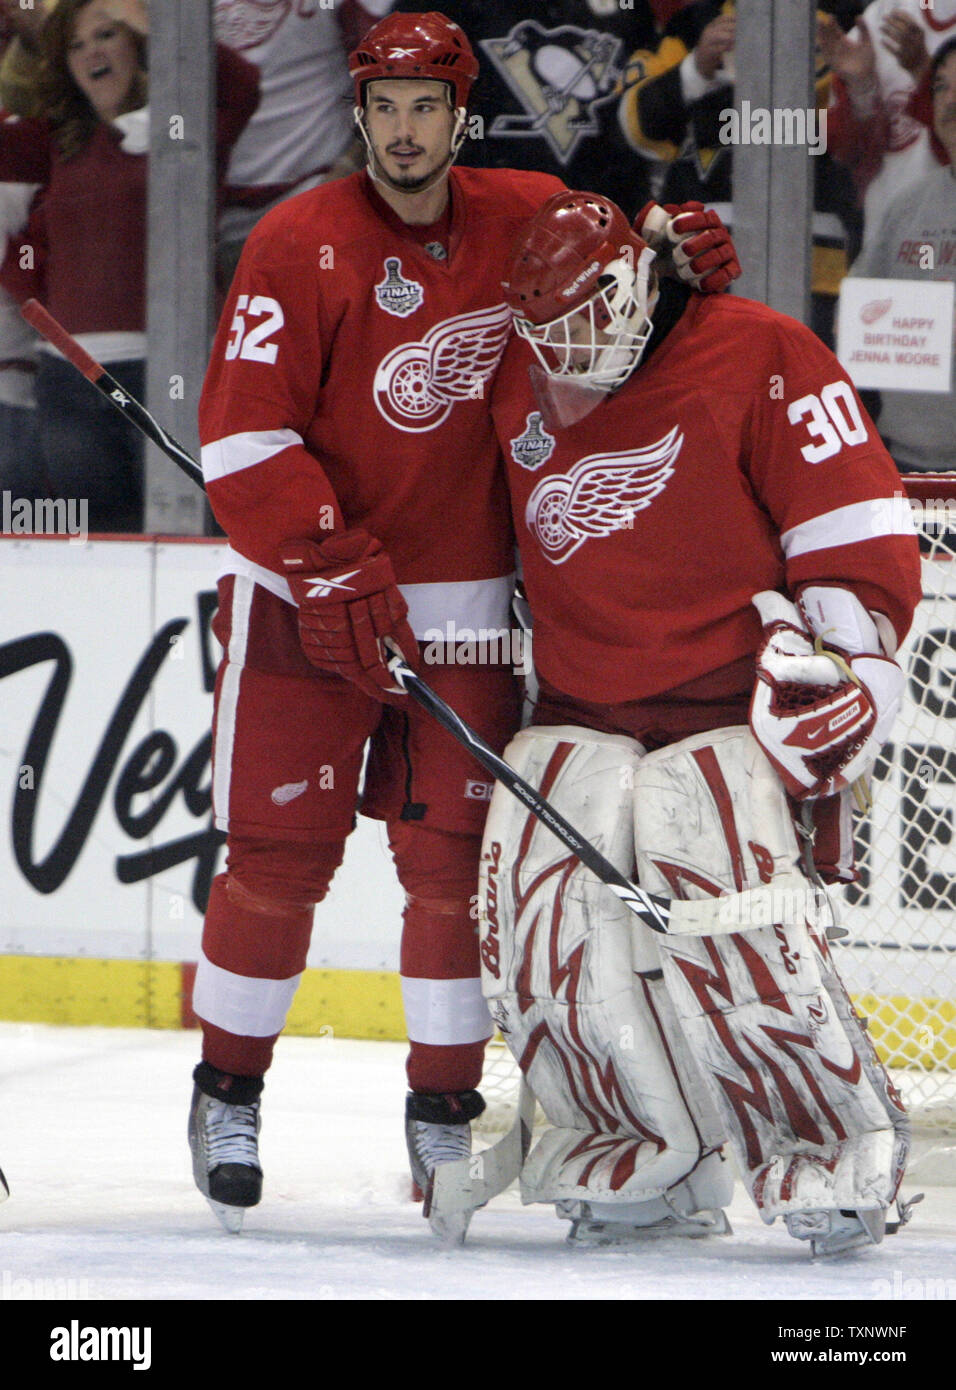 October 28, 2000. Chris Osgood became just the second goalie in #RedWings  history to win 200 NHL games, as the Red Wings won 4-1 against…